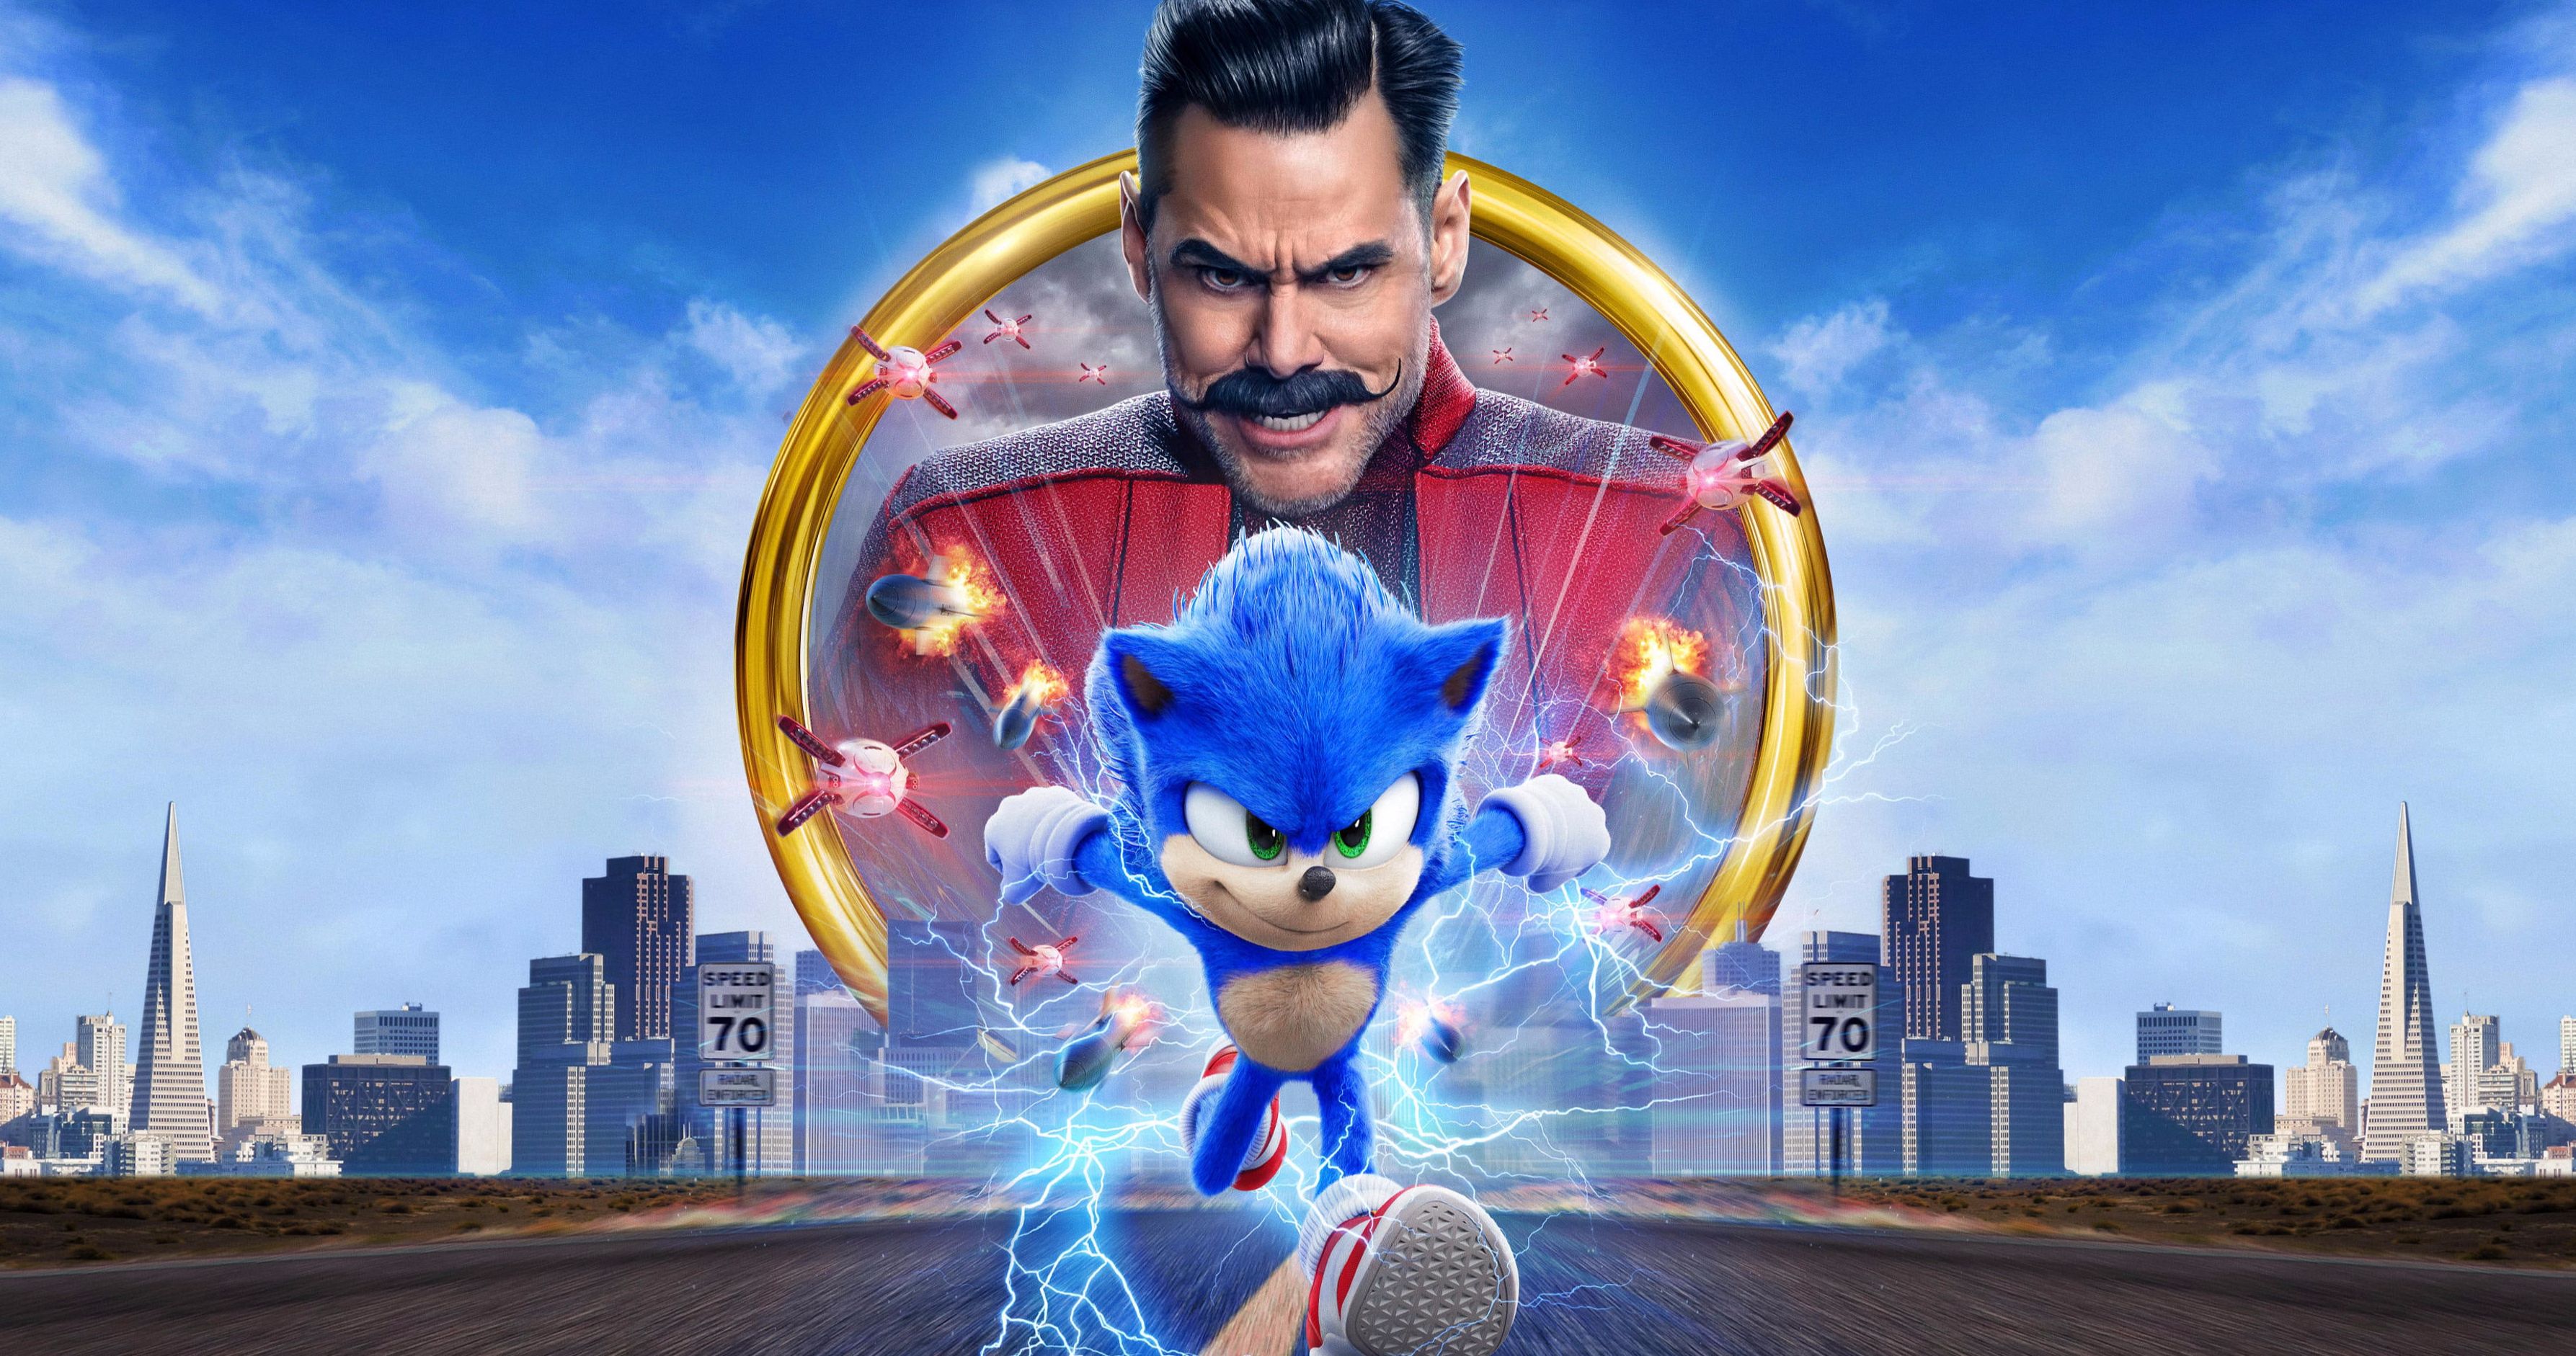 Sonic the Hedgehog Blu-Ray Sneak Peek Goes Behind-The-Scenes with the Cast  [Exclusive]